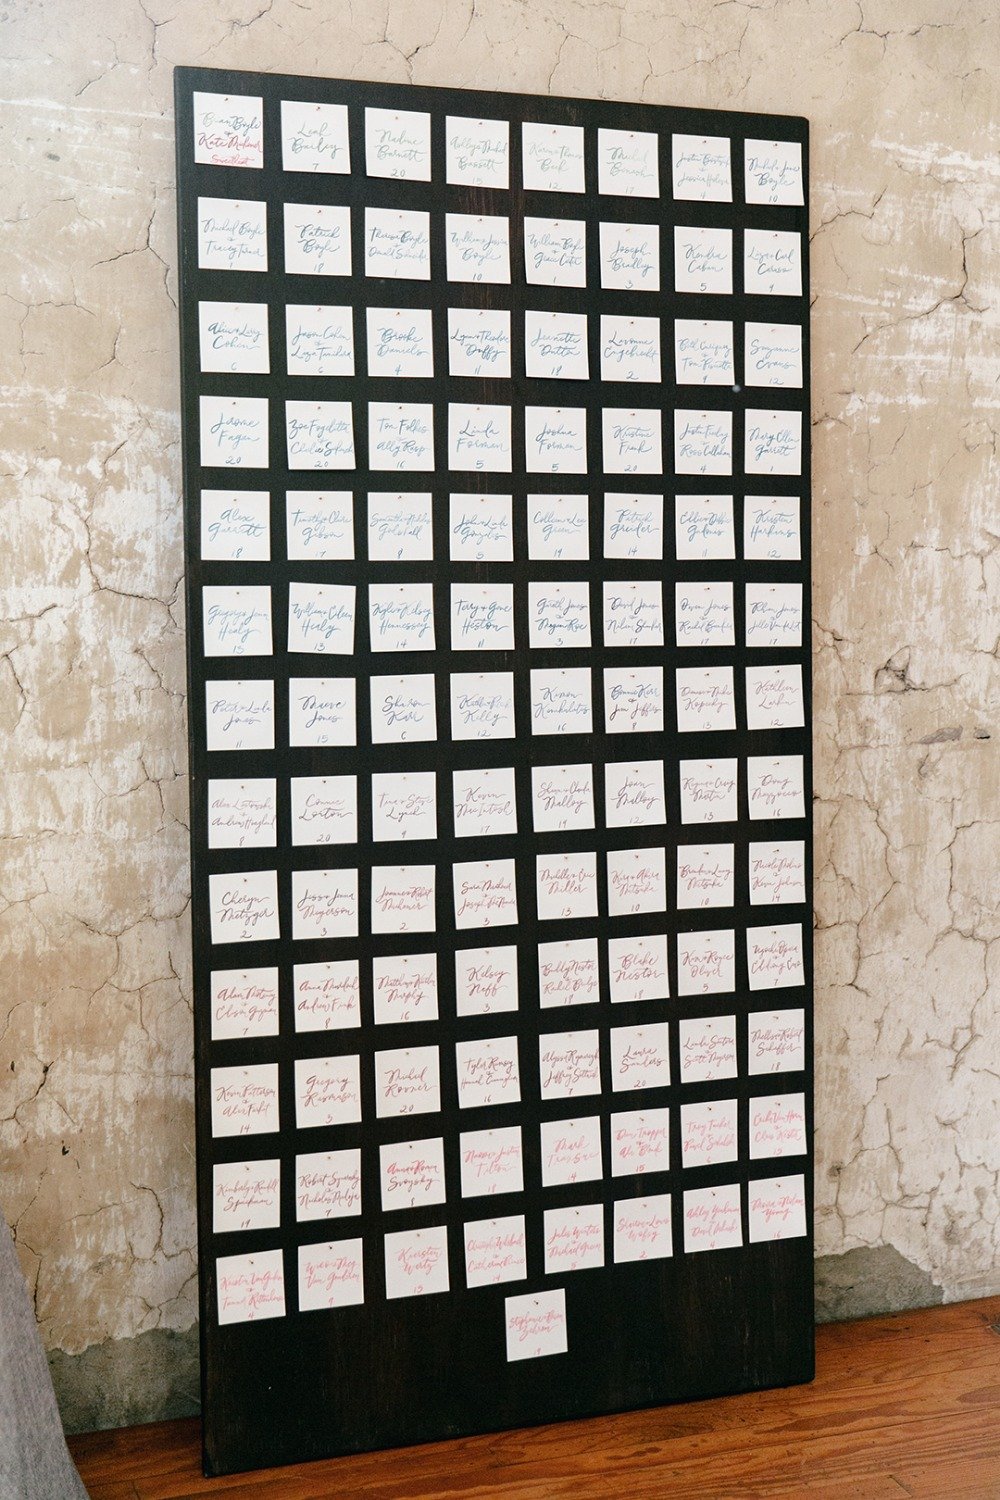 Simple calligraphy seating chart